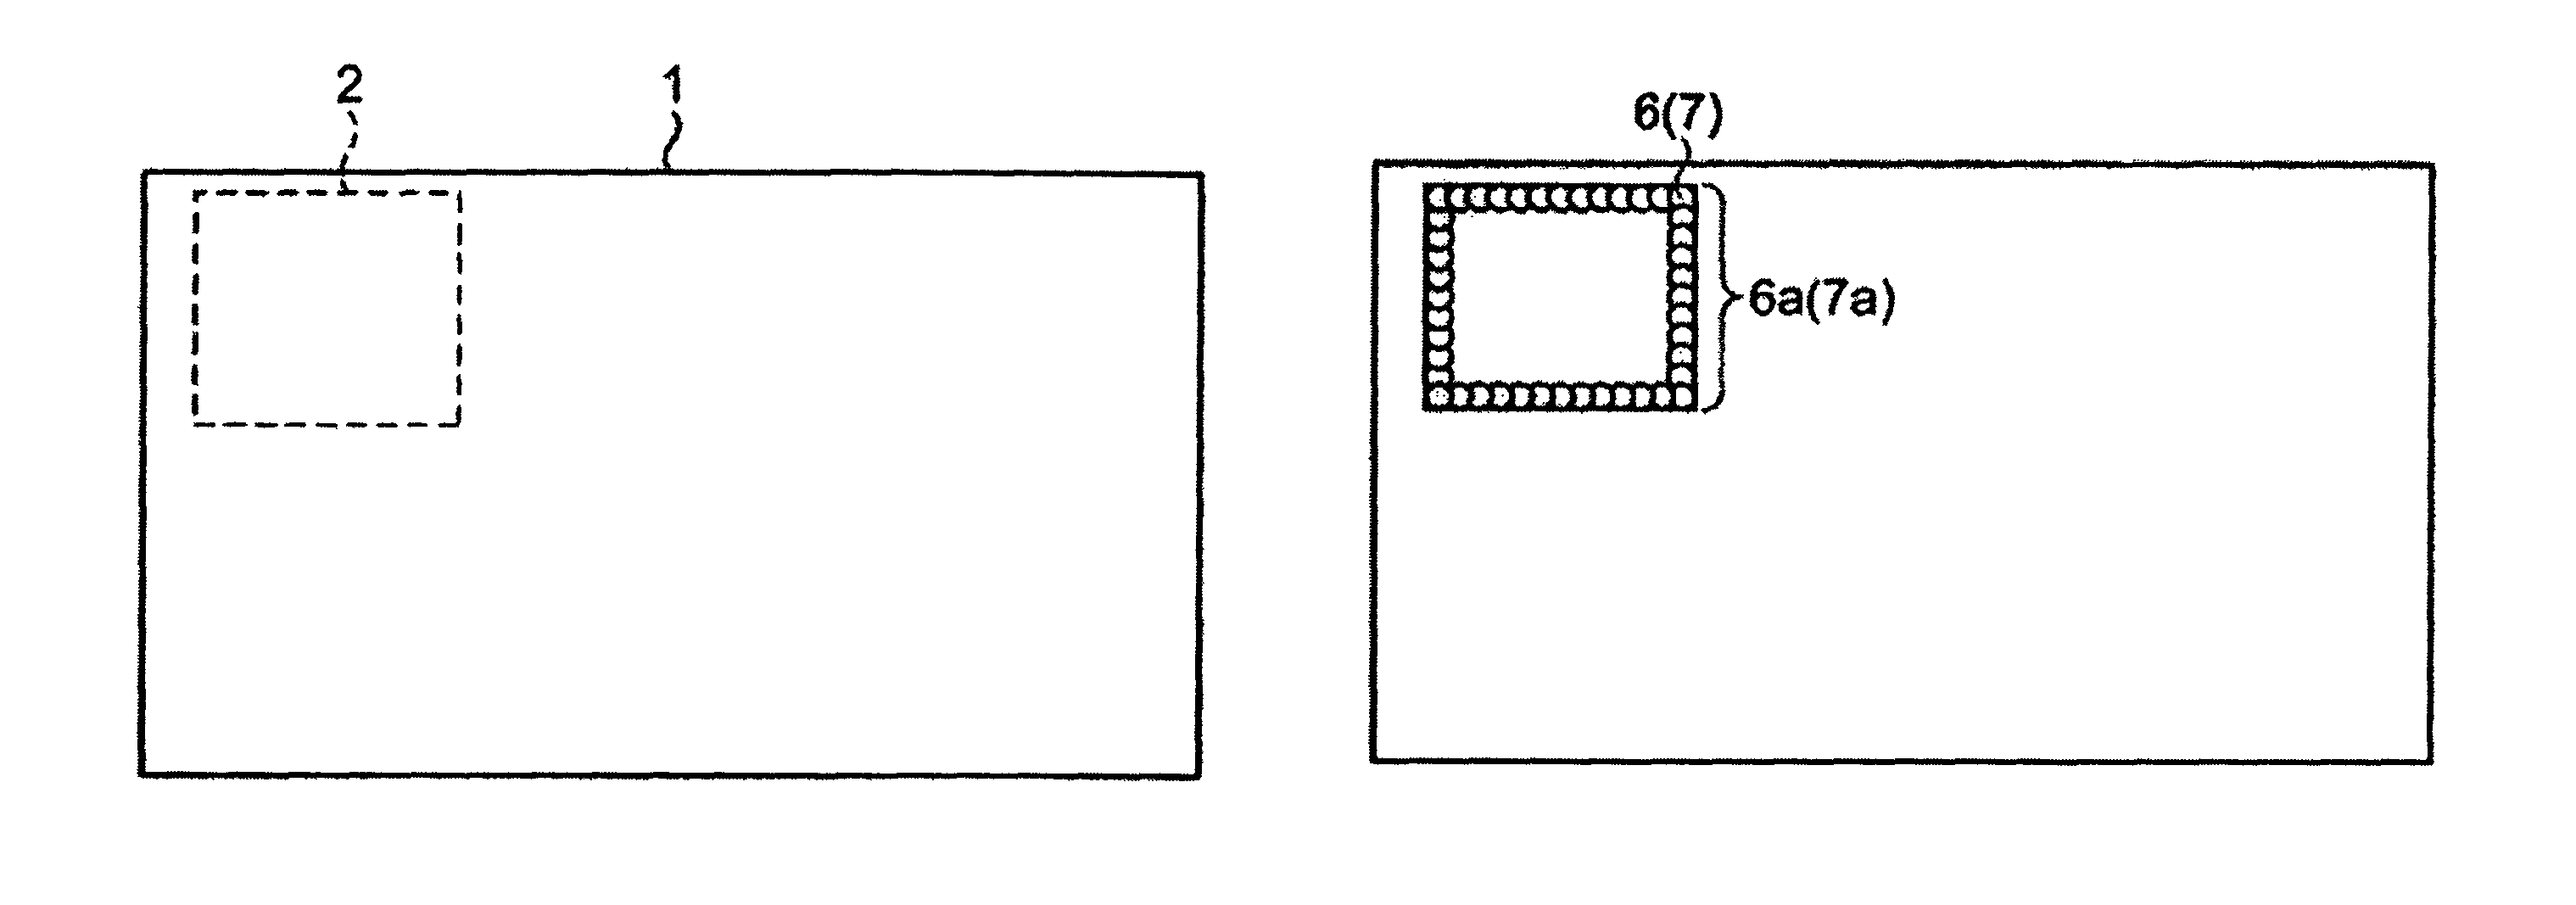 Film pattern forming method for forming a margin band and filling the margin band